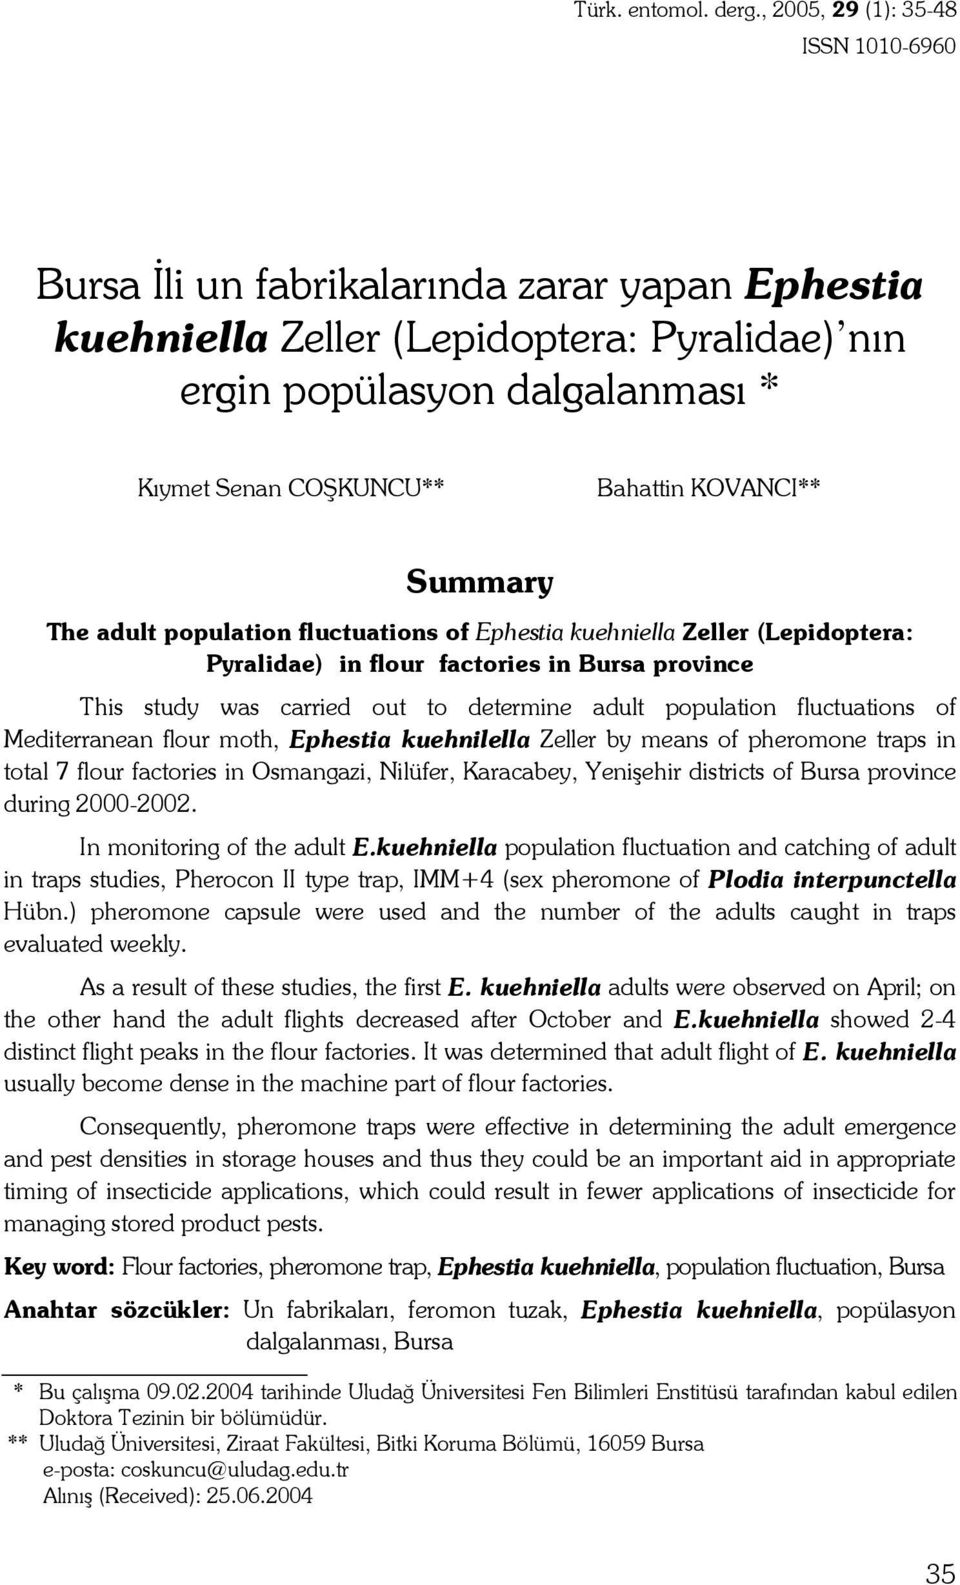 KOVANCI** Summary The adult population fluctuations of Ephestia kuehniella Zeller (Lepidoptera: Pyralidae) in flour factories in Bursa province This study was carried out to determine adult